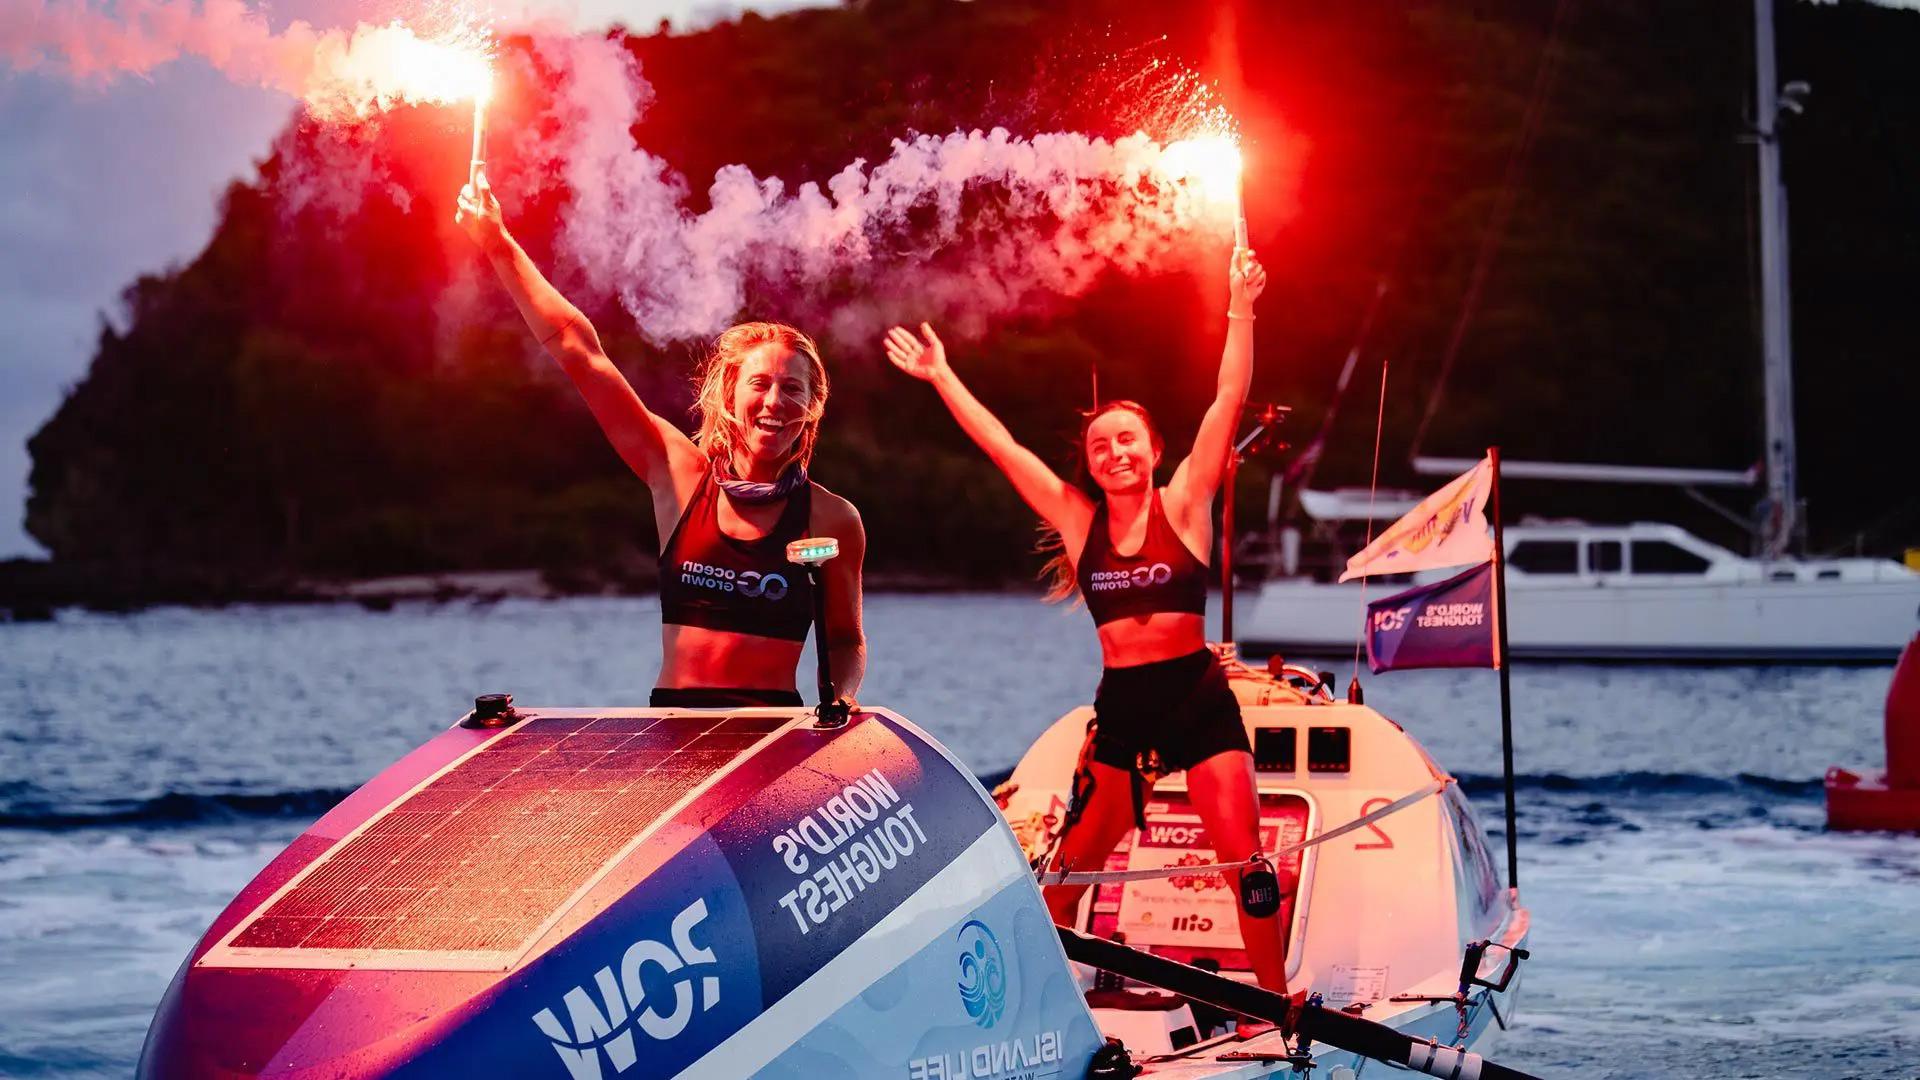 Lisa Roland, left, and Nini Champion ’16 raise celebratory flares at the finish line of the World’s Toughest Row in Antigua last month. The pair, known as Team Ocean Grown, finished the 3,000-mile race in 45 days, one hour and 27 minutes, setting a world record for a female duo.